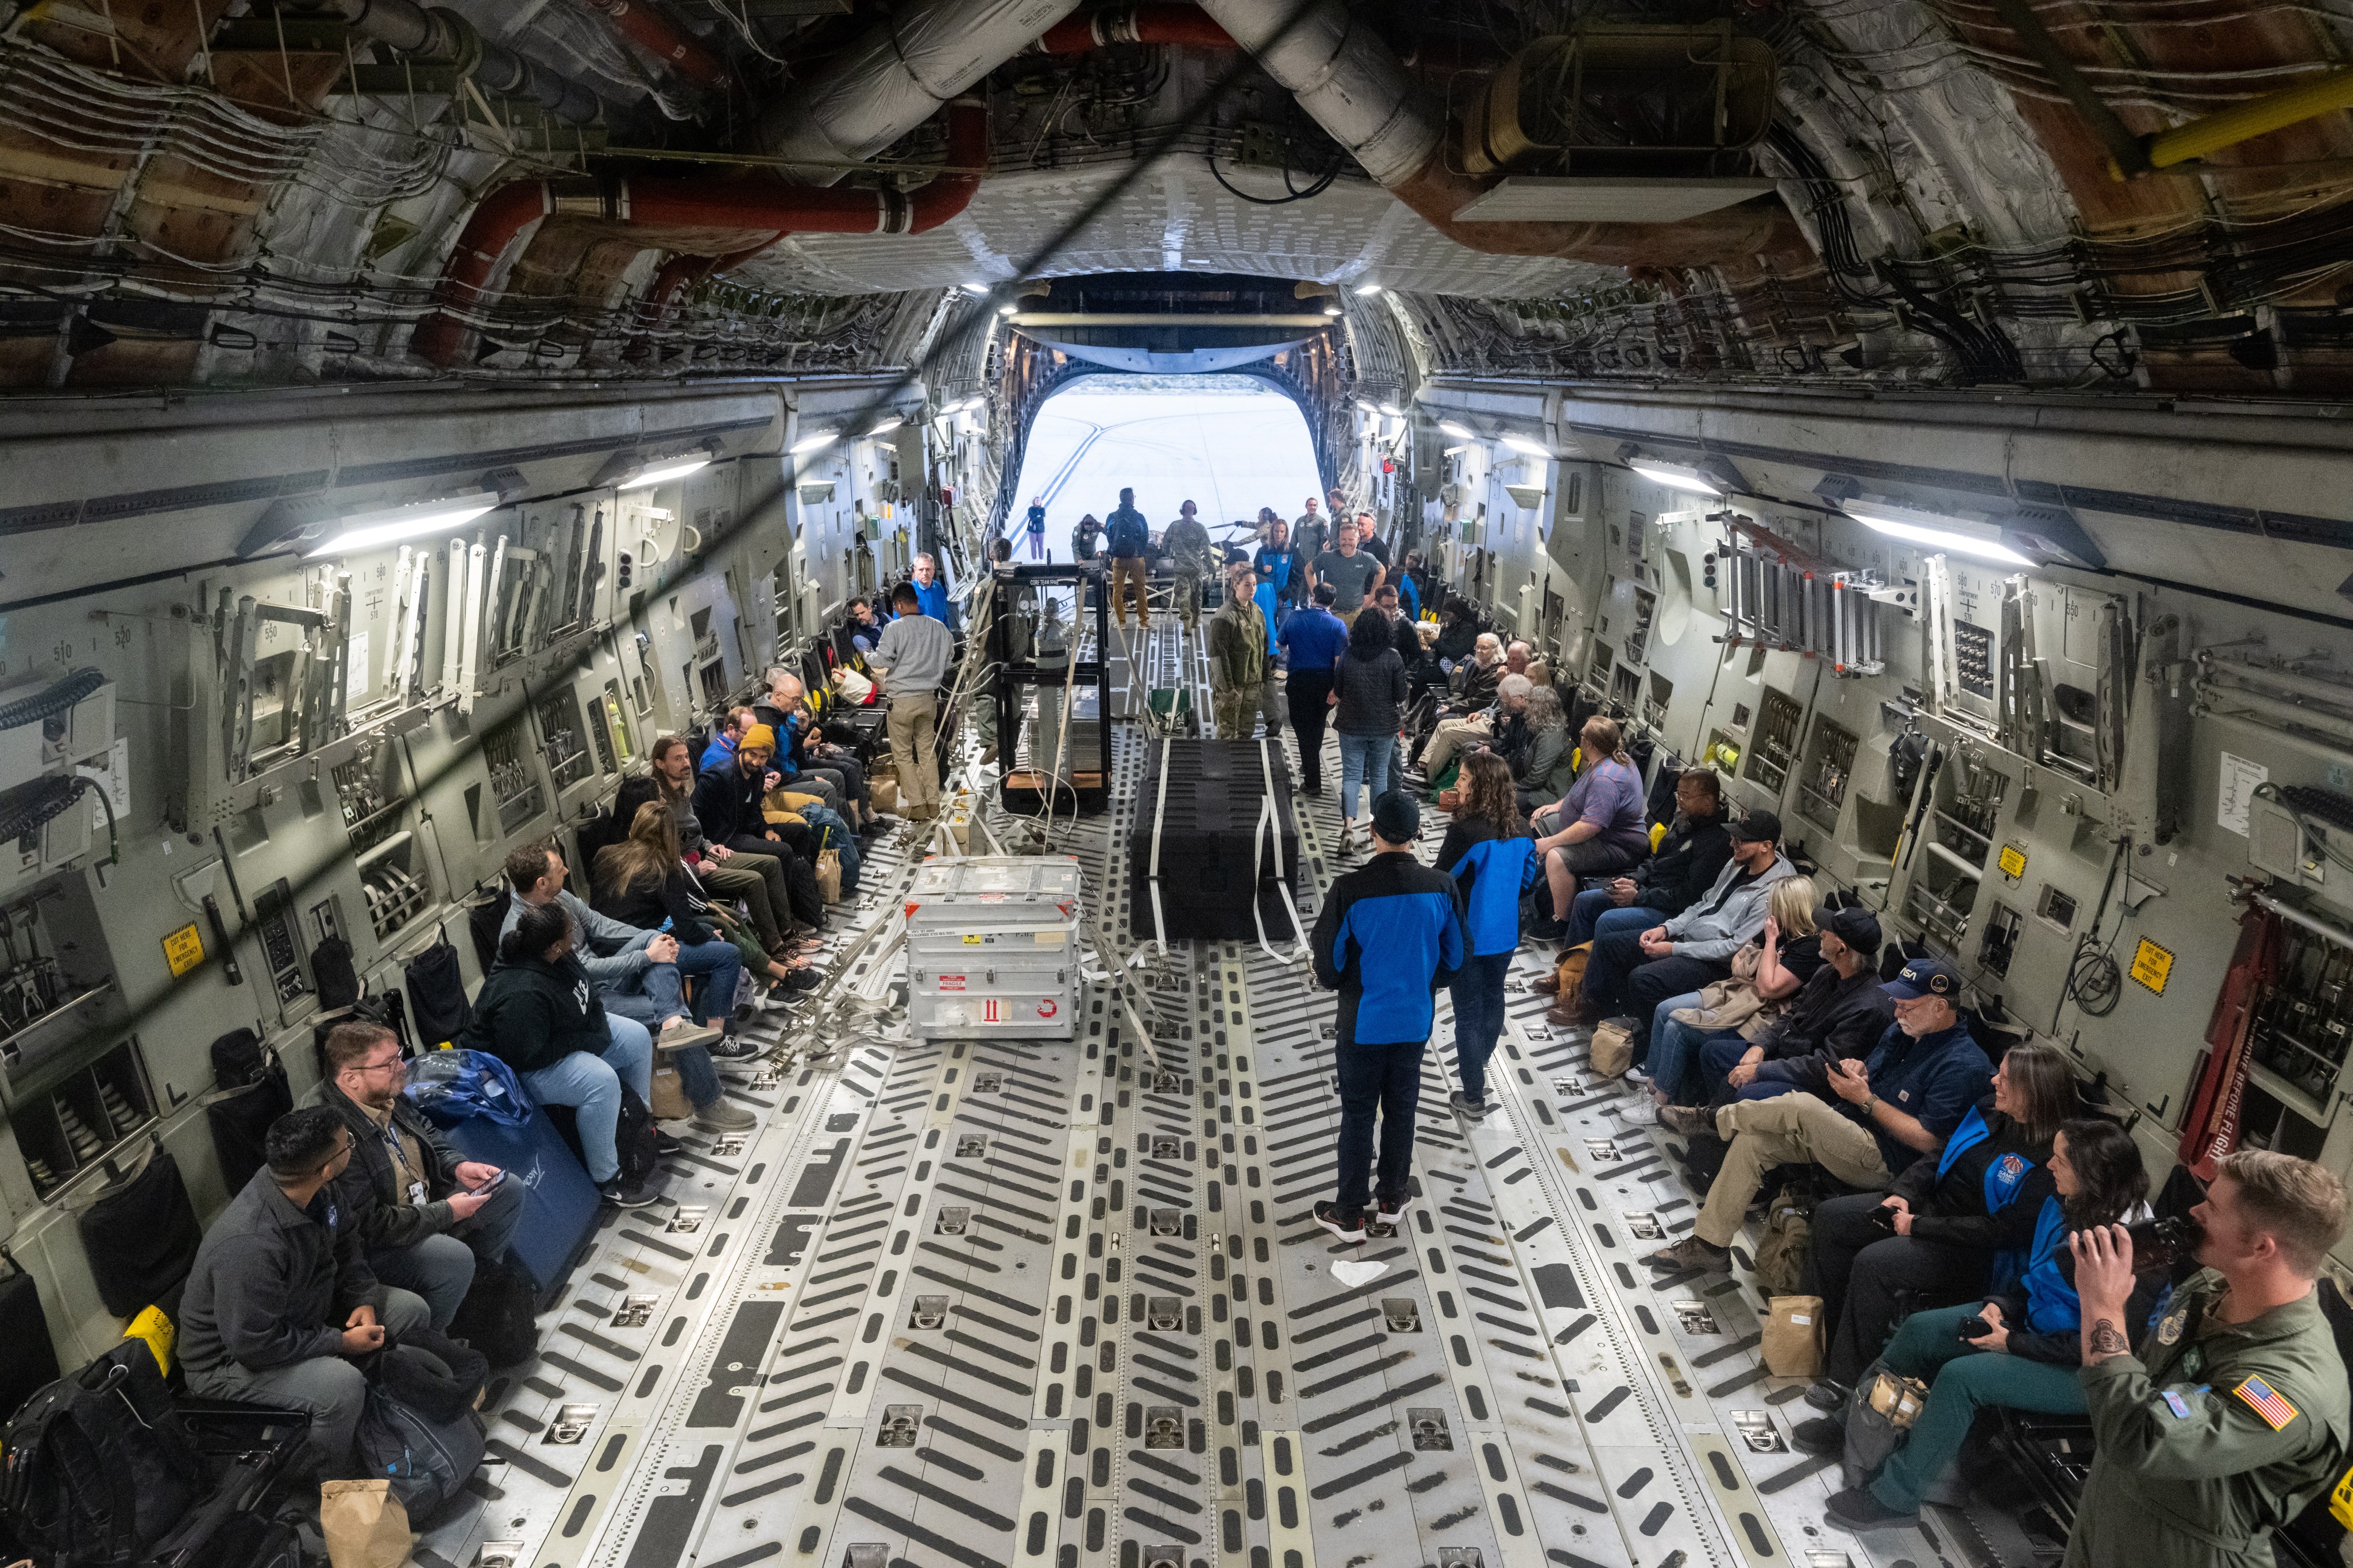 A group of people sit inside a C-17 Globemaster aircraft with the sample return capsule and its accompany nitrogen tanks in the middle of the plane